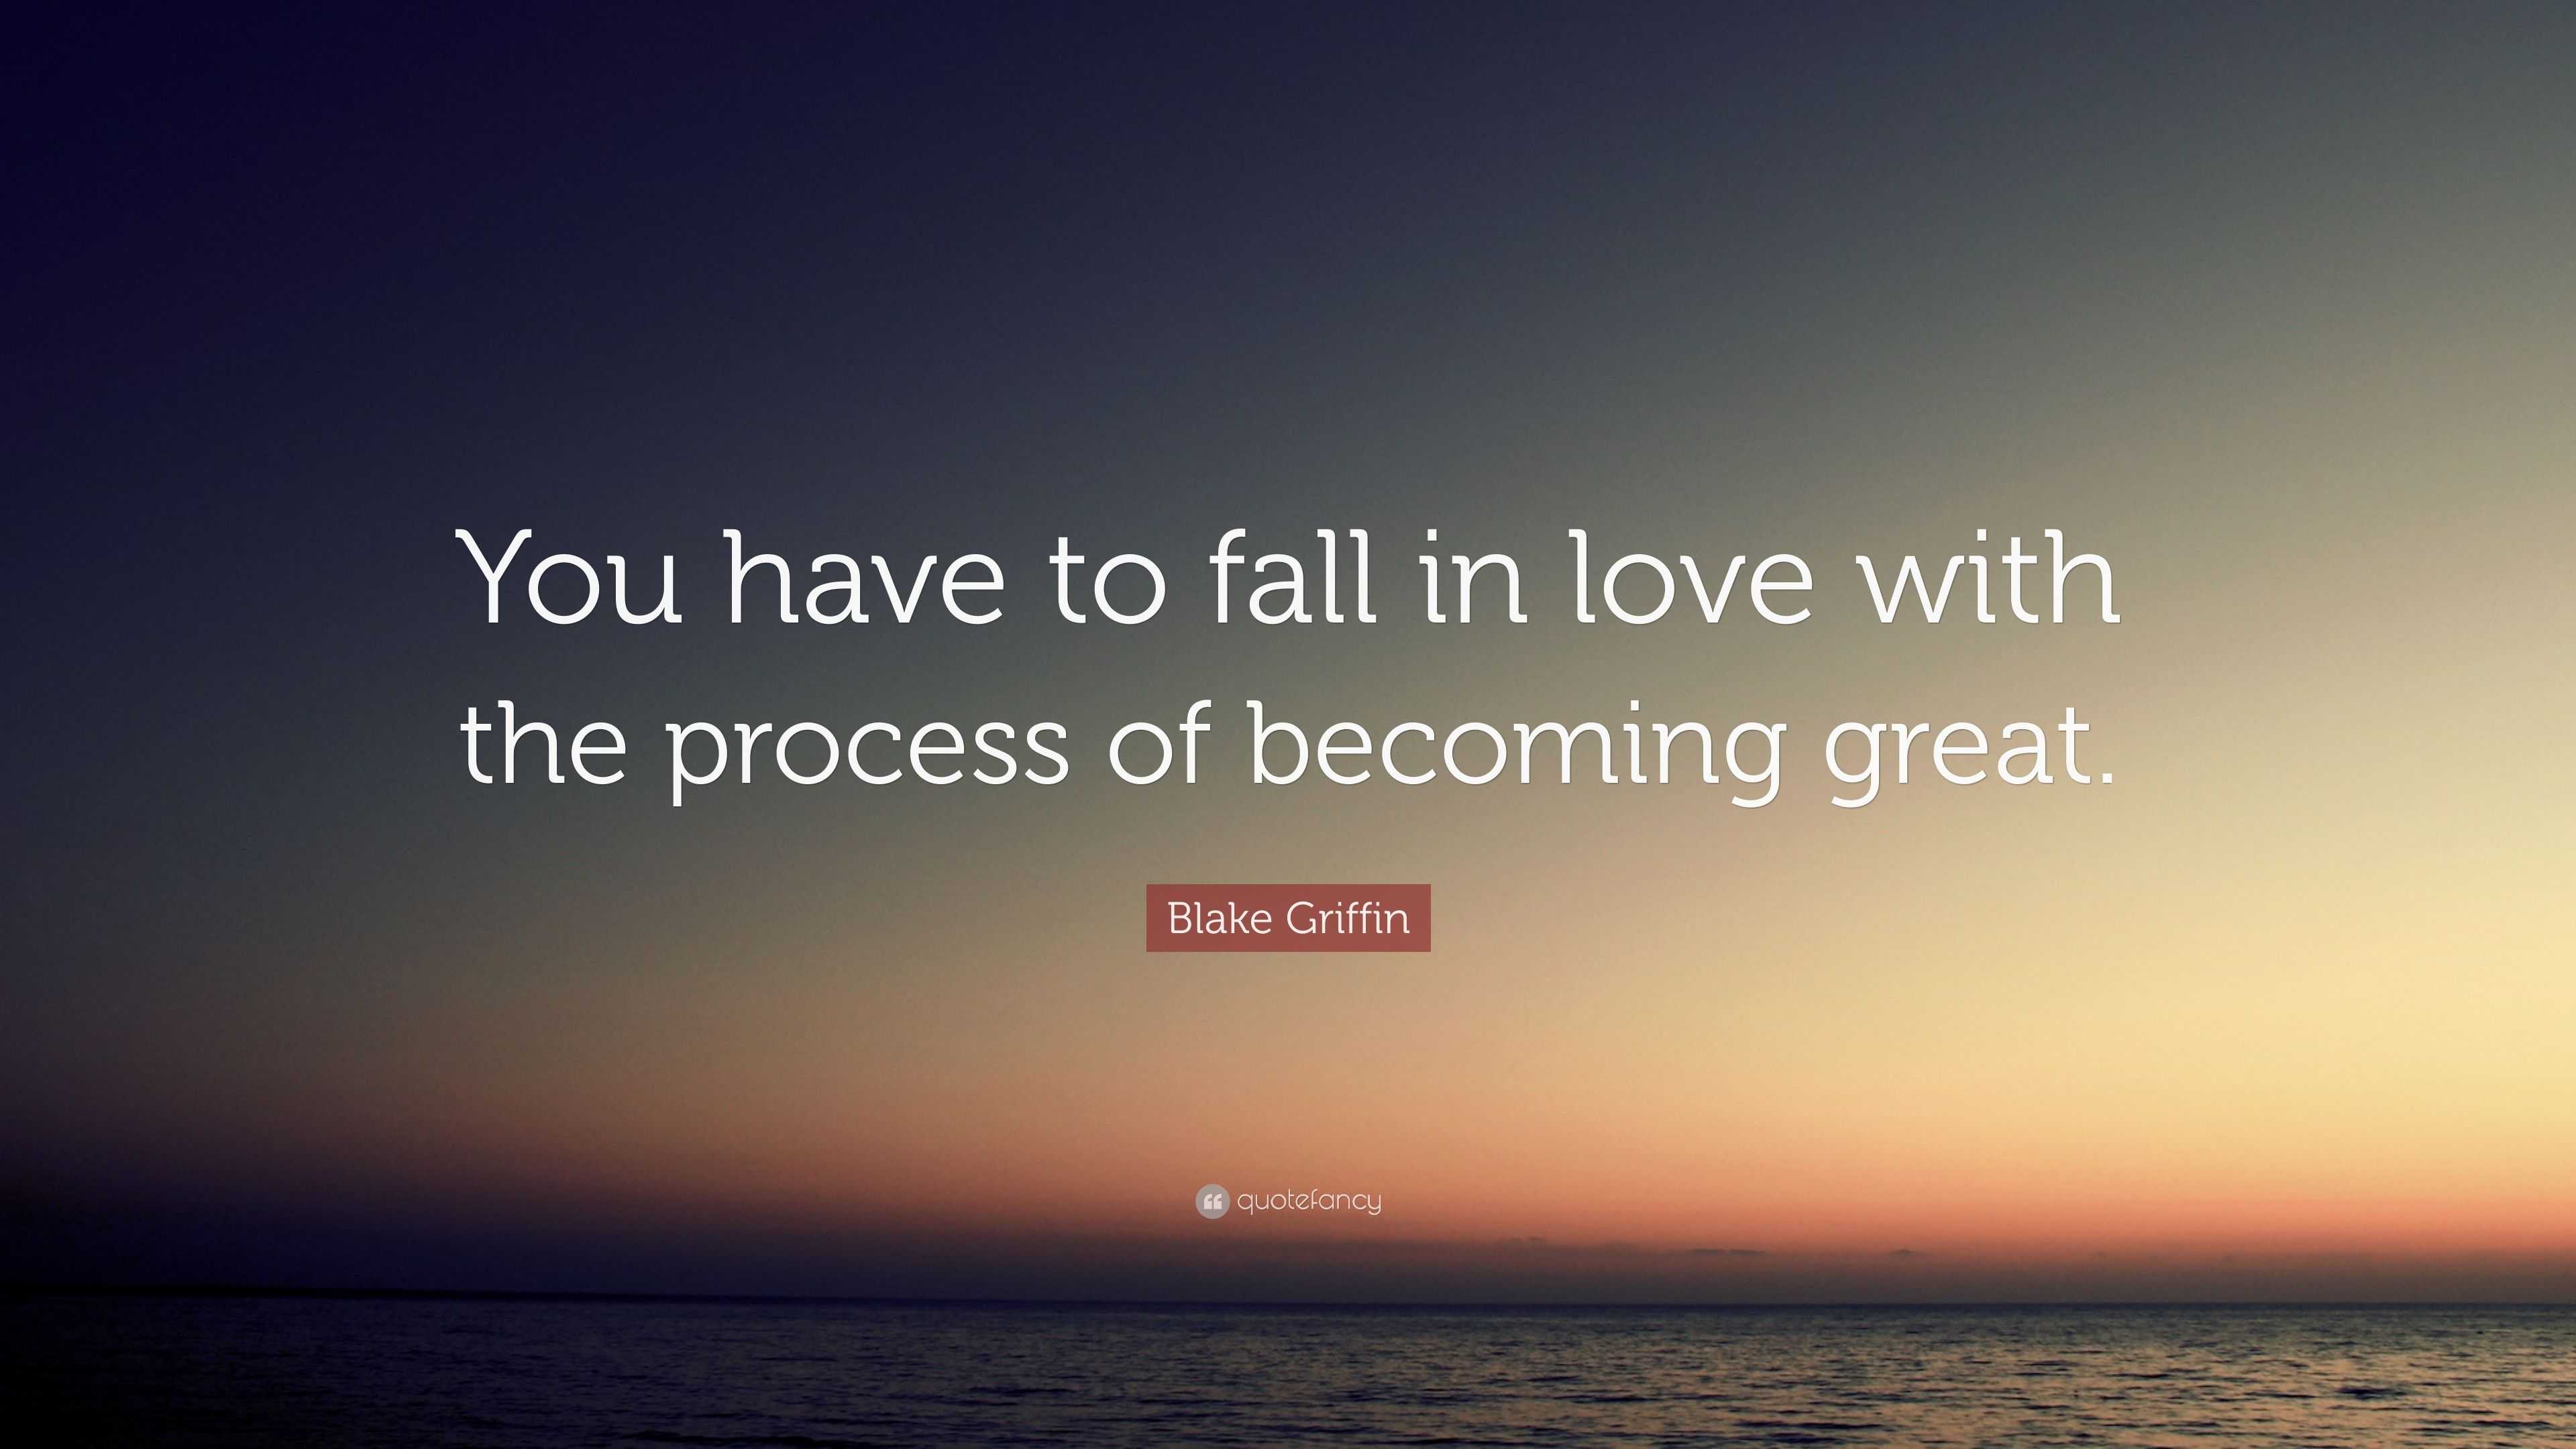 Blake Griffin Quote You Have To Fall In Love With The Process Of Becoming Great